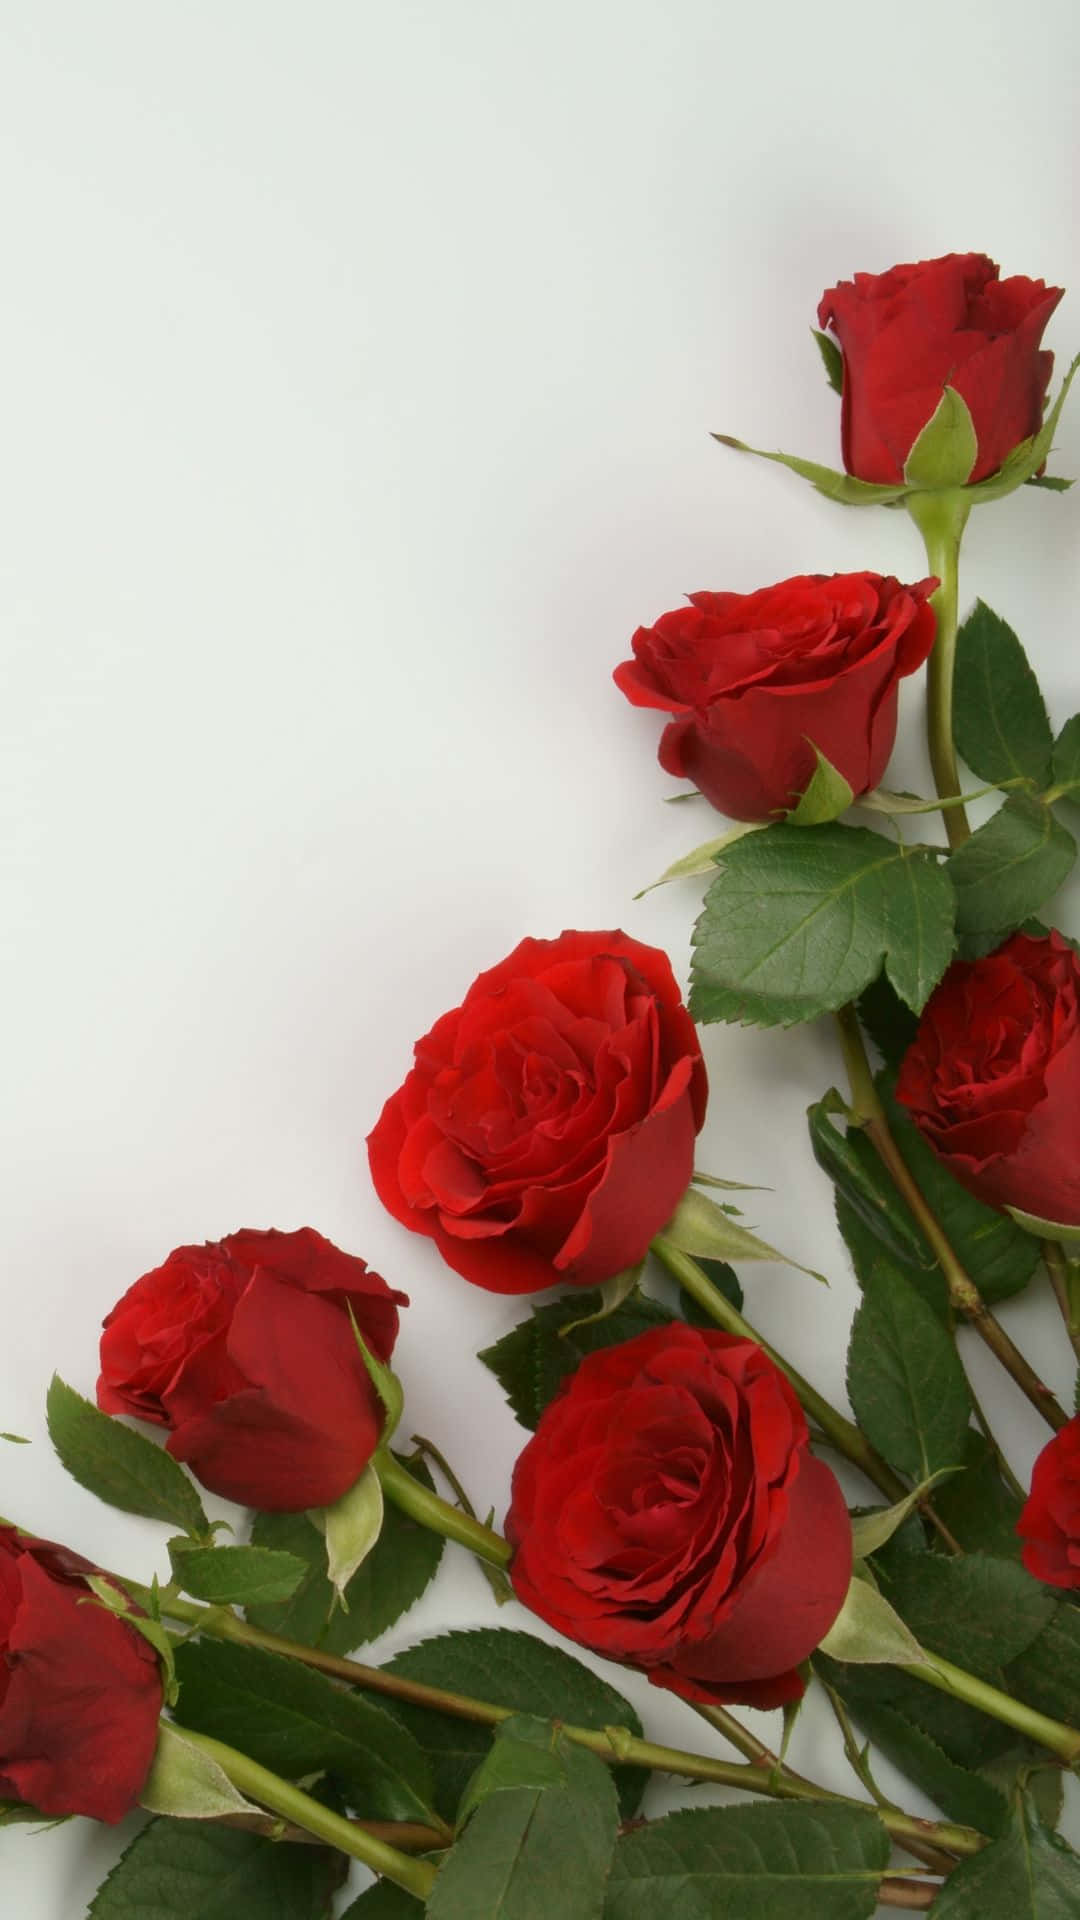 A Bunch Of Red Roses On A White Background